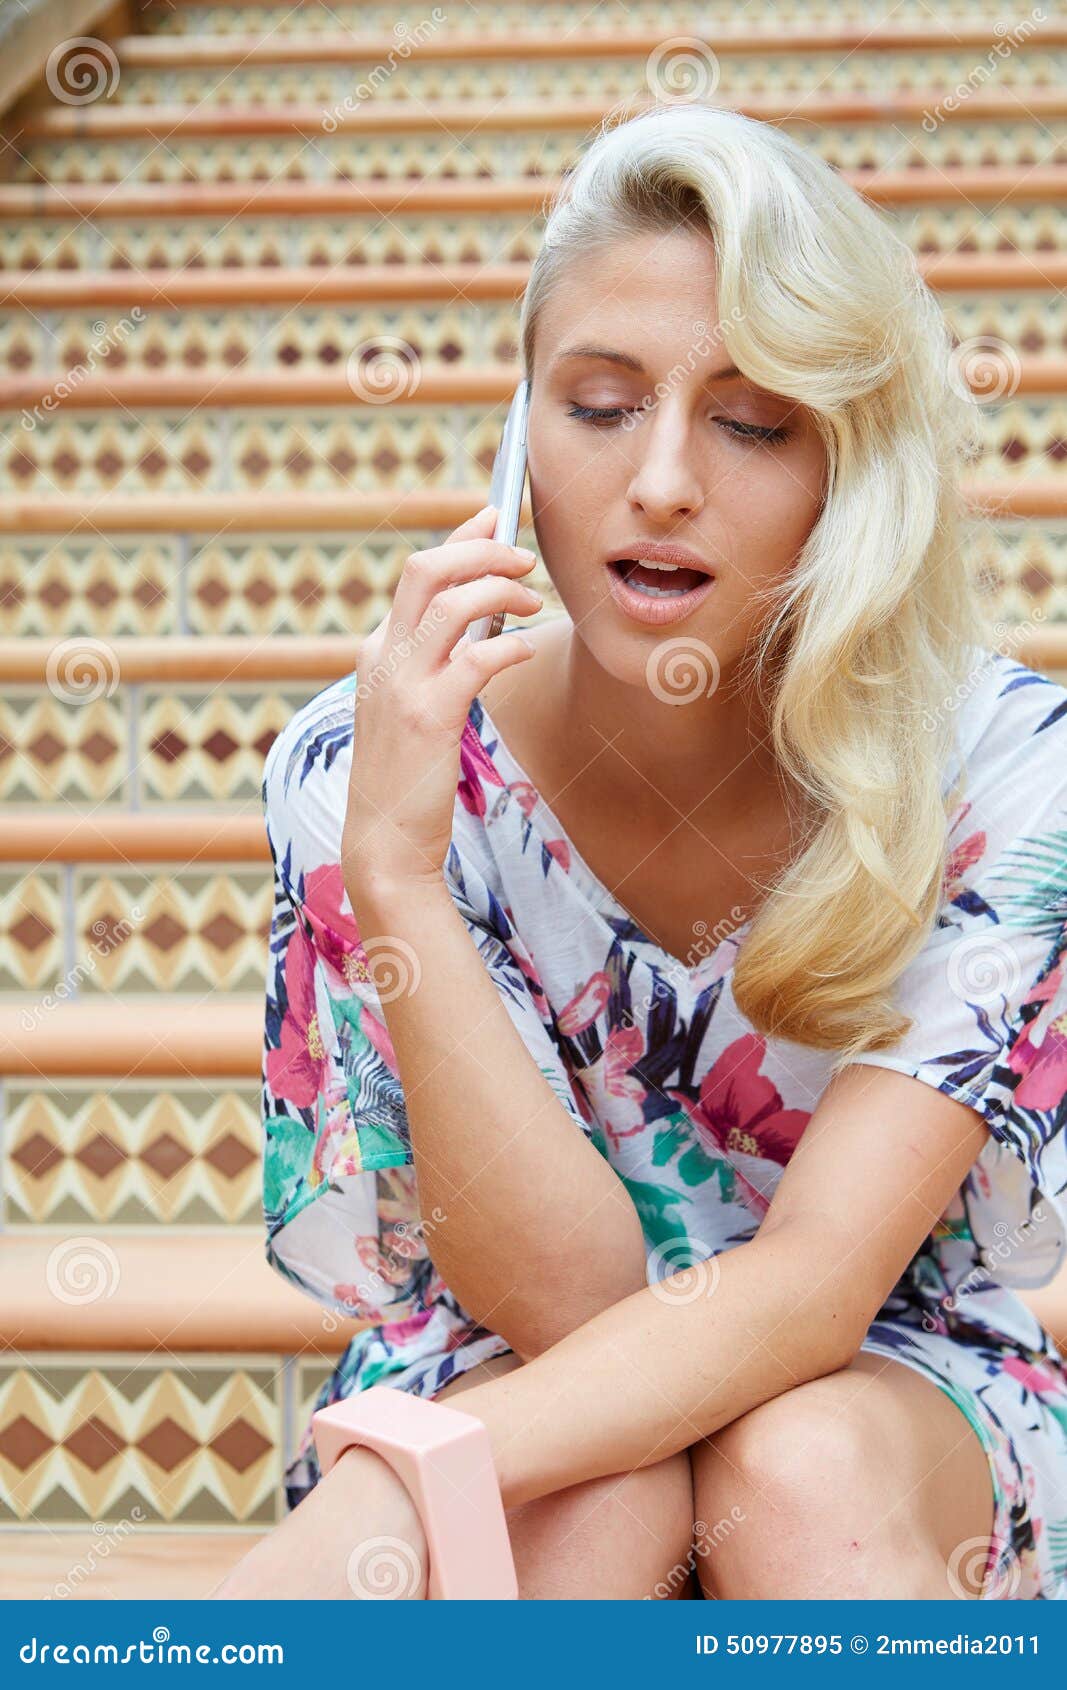 Sensual Blonde Woman with a Phone Stock Image - Image of portrait ...